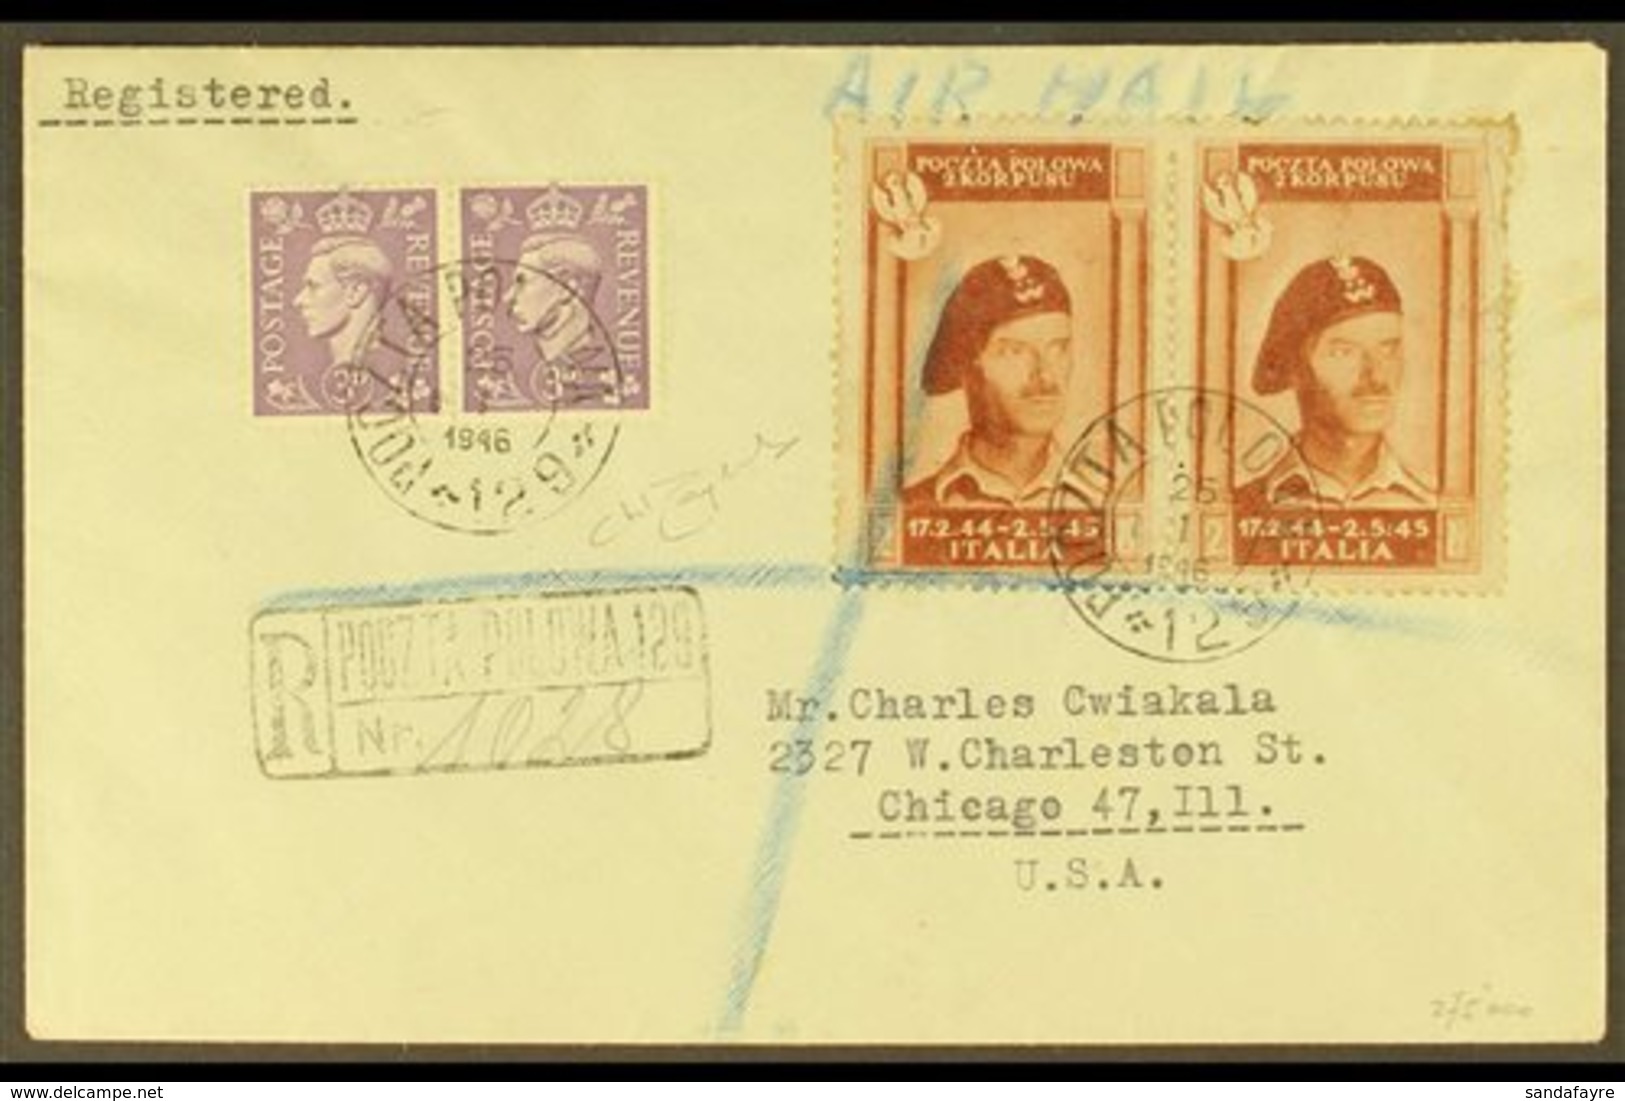 \Y POLISH CORPS\Y 1946 Registered Cover To Chicago Franked GB 3d Lilac Plus Polish Corps 2z Red Brown Pair, Sass 4, With - Ohne Zuordnung